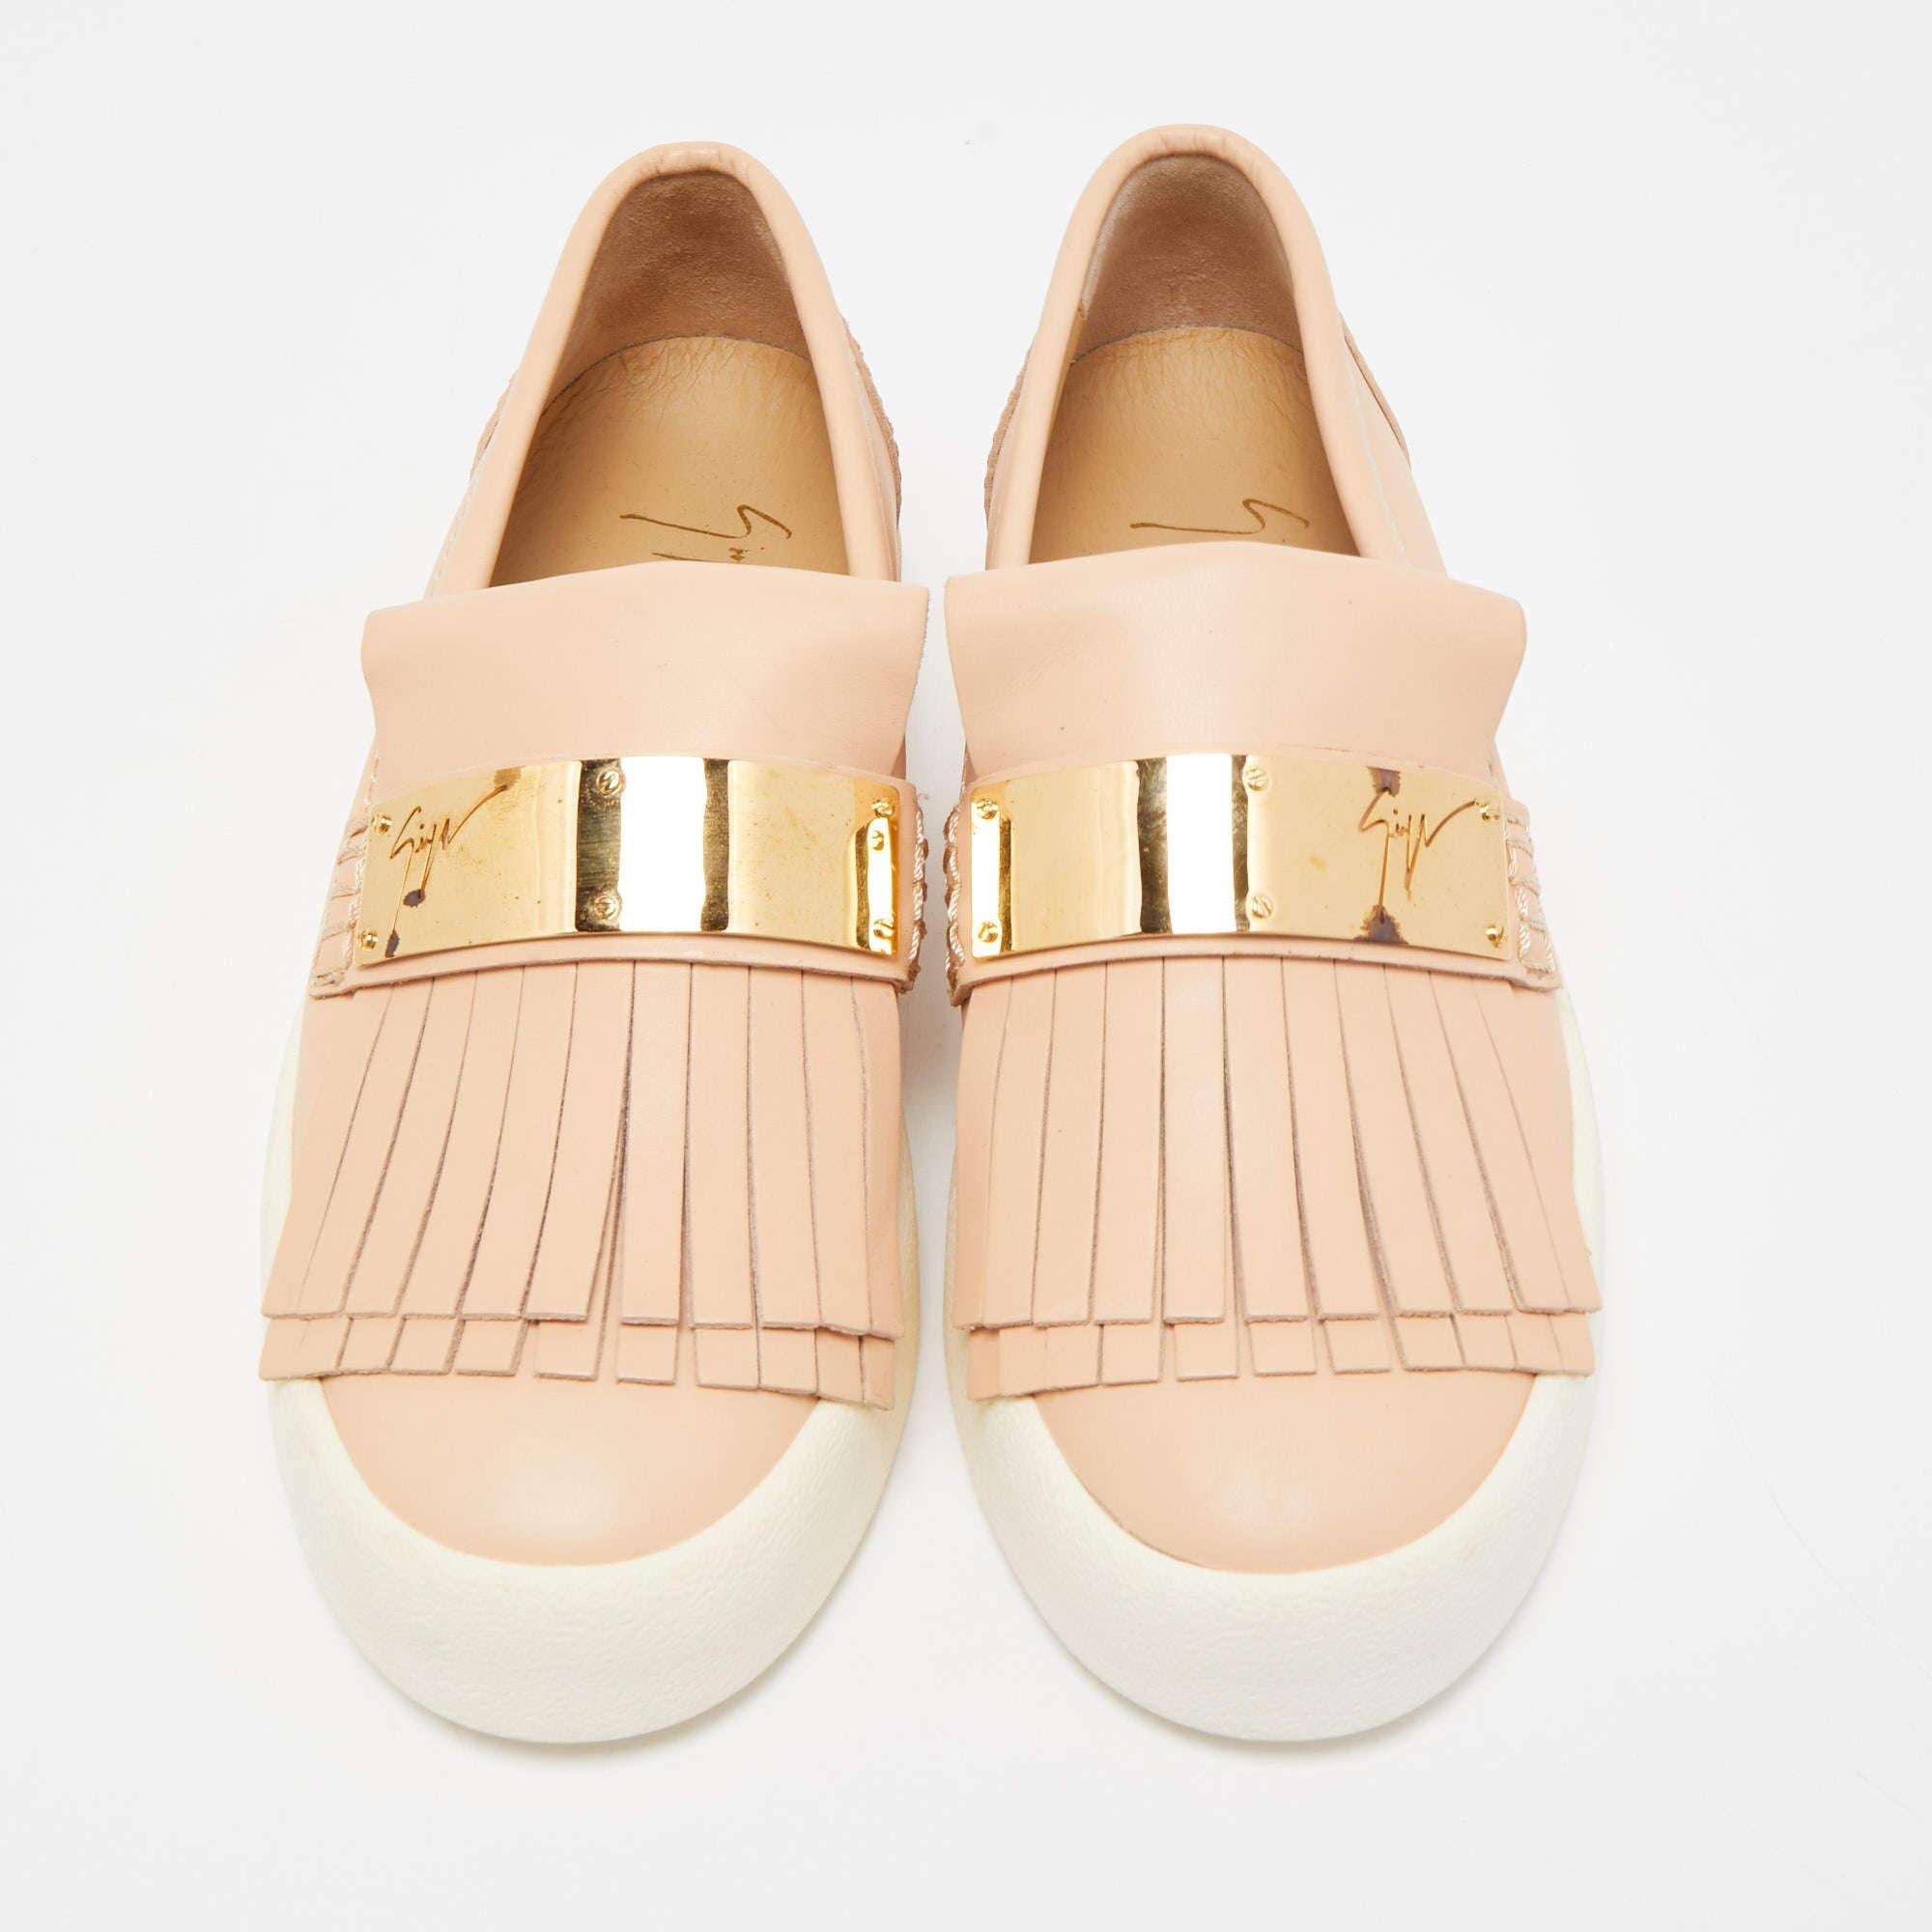 Flaunt the latest trends with these sneakers from Giuseppe Zanotti! They've been crafted from leather and designed with gold-tone metal accents over fringes that adorn the vamps. The pair is complete with snug insoles and sturdy rubber